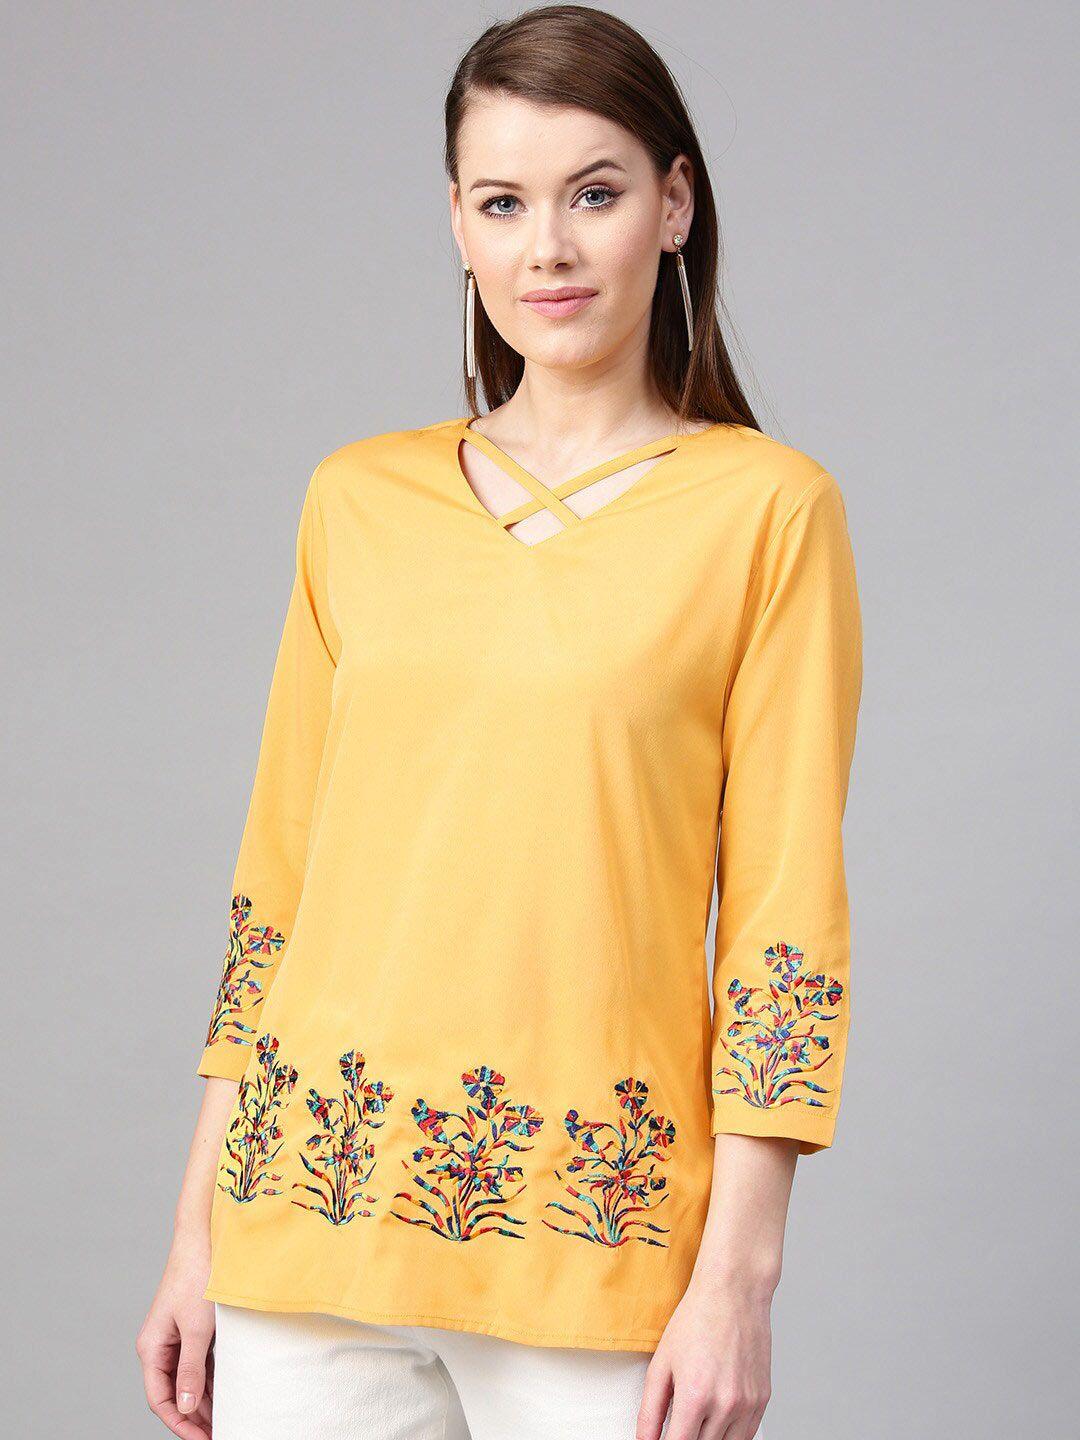 rare-yellow-floral-embroidered-v-neck-top